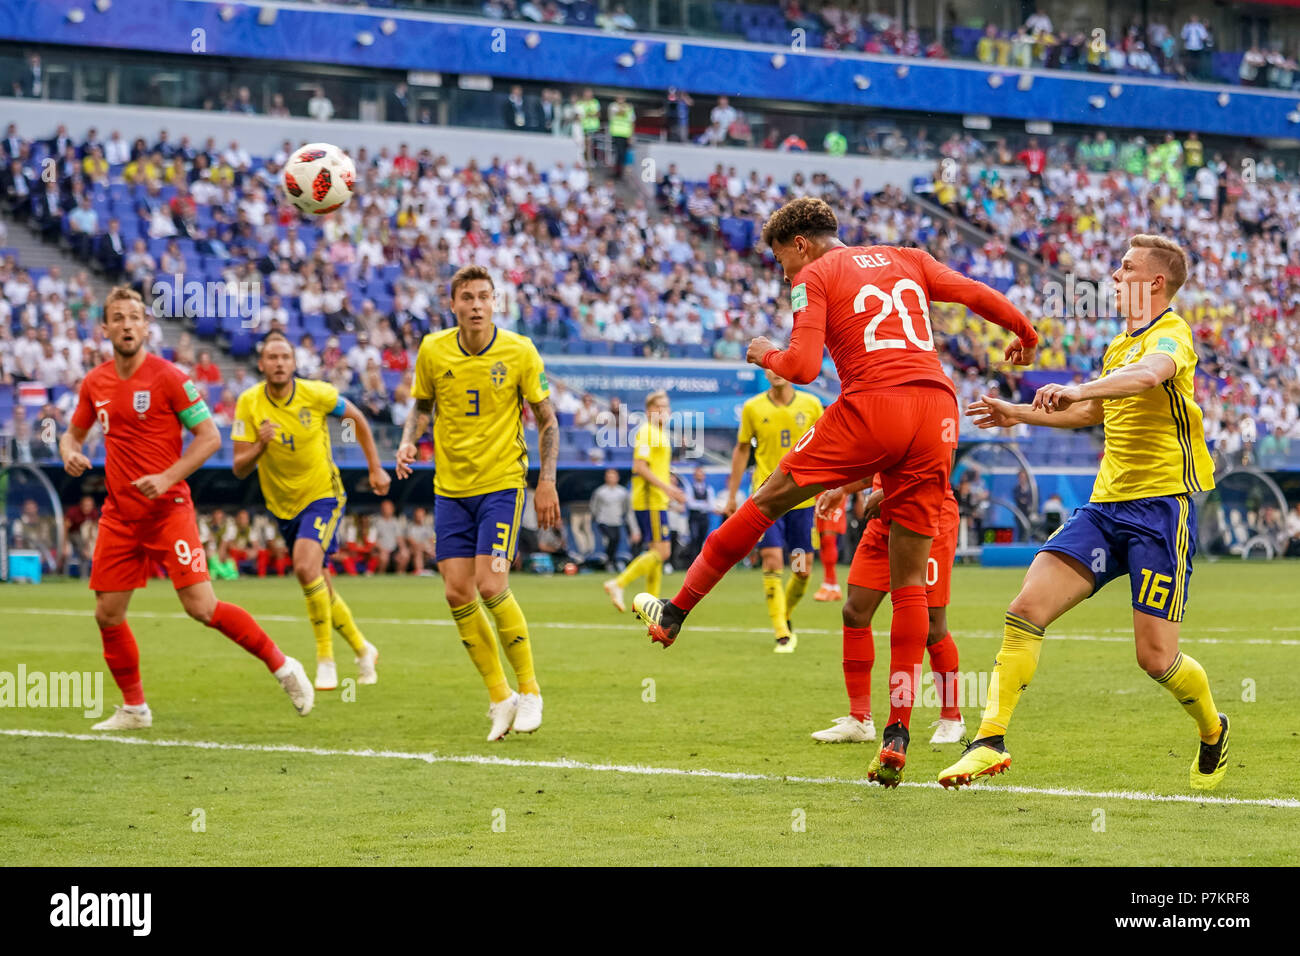 Samara, Russia. 7th July 2018.  Dele Alli of England scoring to 0-2 in the 59rd minute at Samara Stadium during the quarter final between England and Sweden during the 2018 World Cup. Ulrik Pedersen/CSM Credit: Cal Sport Media/Alamy Live News Stock Photo